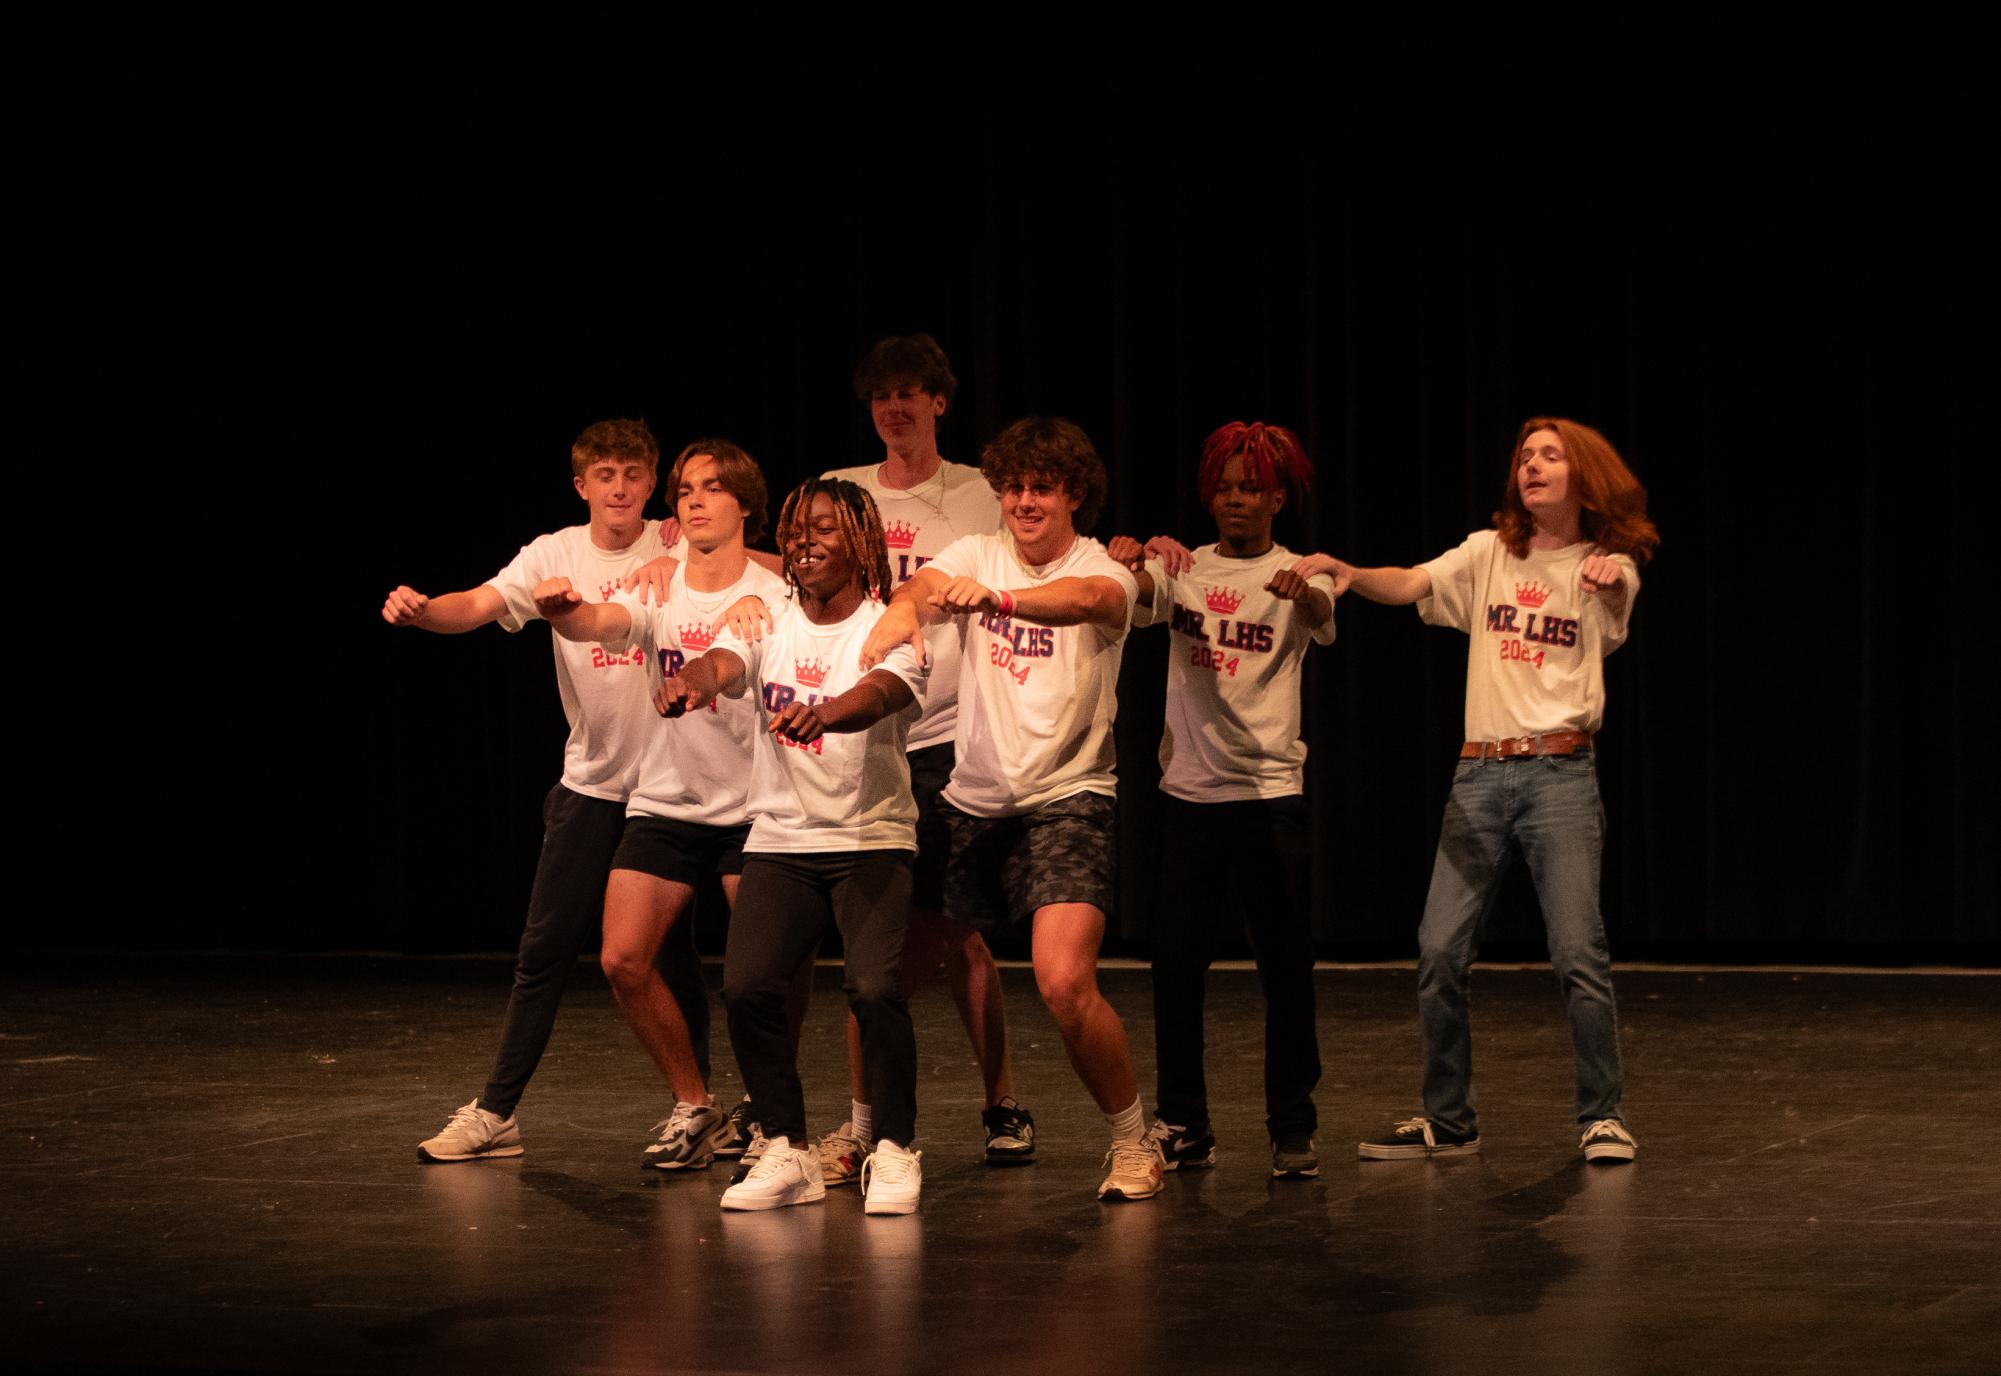 The seven runner ups for Mr. LHS open the show with a group dance to show off what is to come during the show.